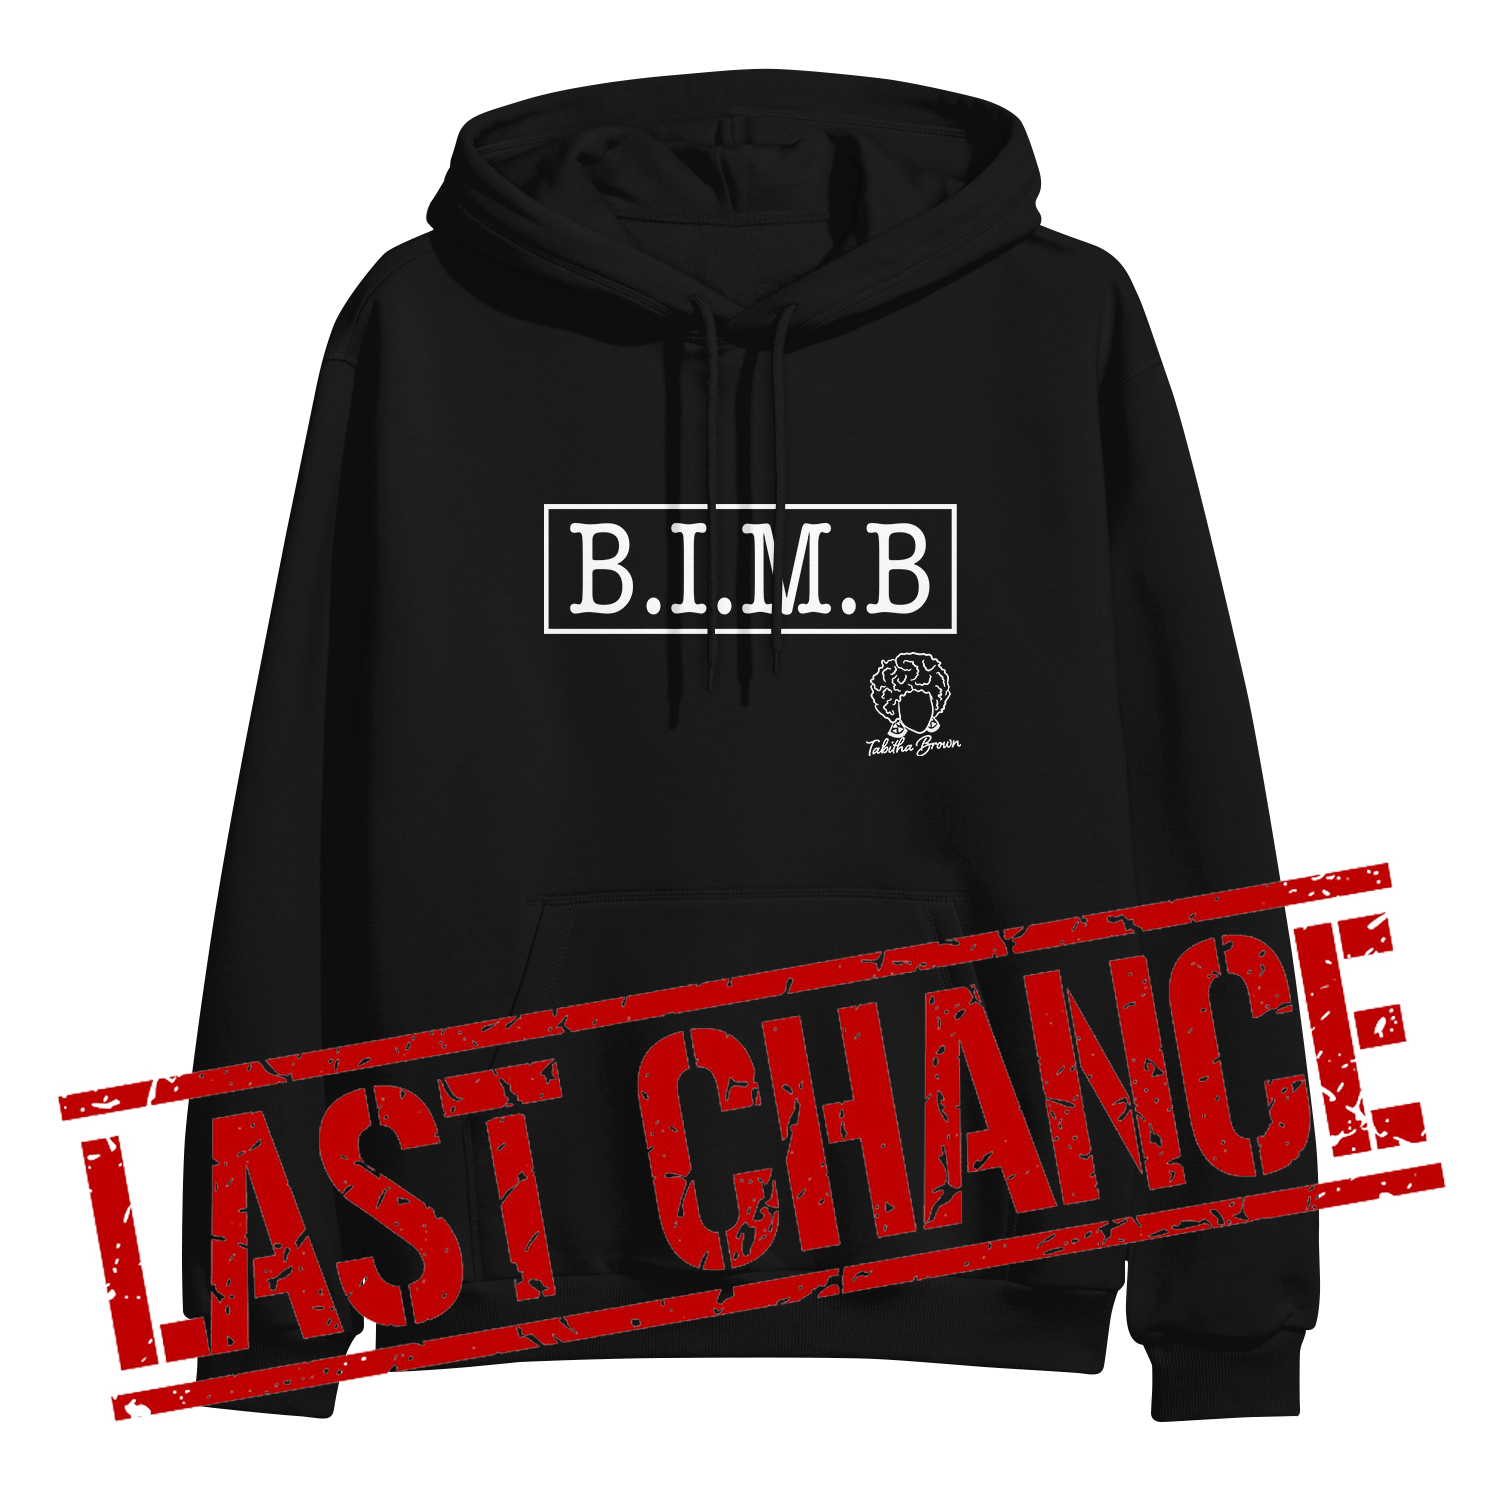 image of black pullover hoodie on clear background. hoodie has full chest print in white that has a rectangle, and inside that in capital letters says B I M B and outside the rectangle on the bottom right is tabitha brown's logo of her head wearing earrings and her name in cursive. over the bottom part of the image in large red text says last chance.